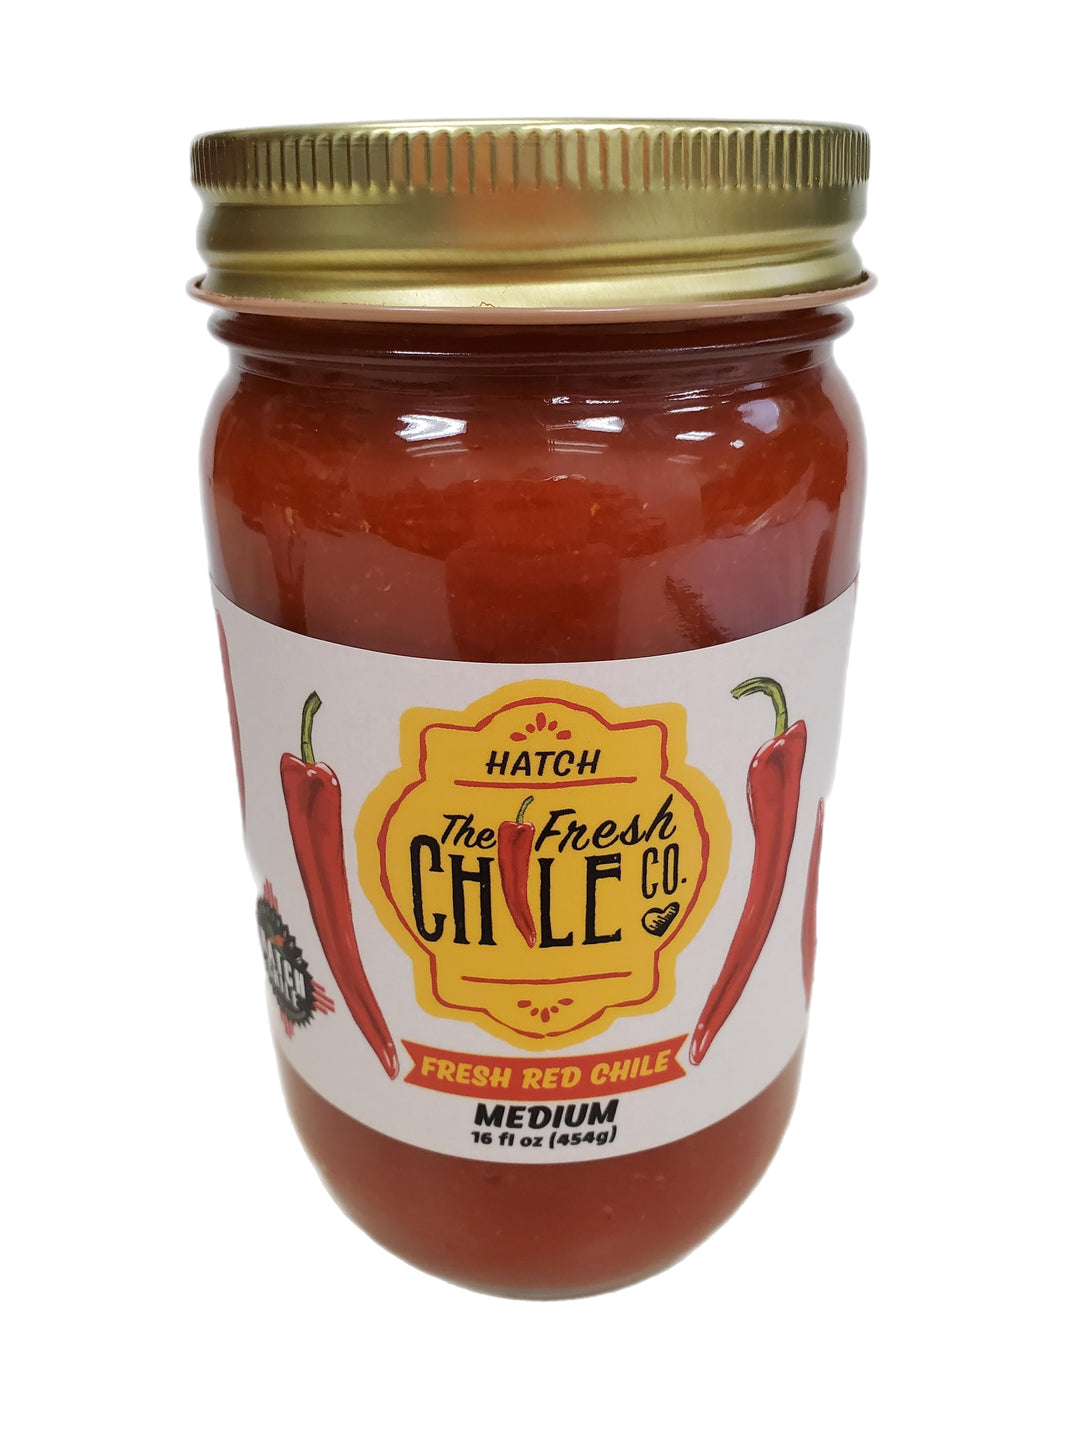 Fresh Chile Company Hatch Red Chile Sauce